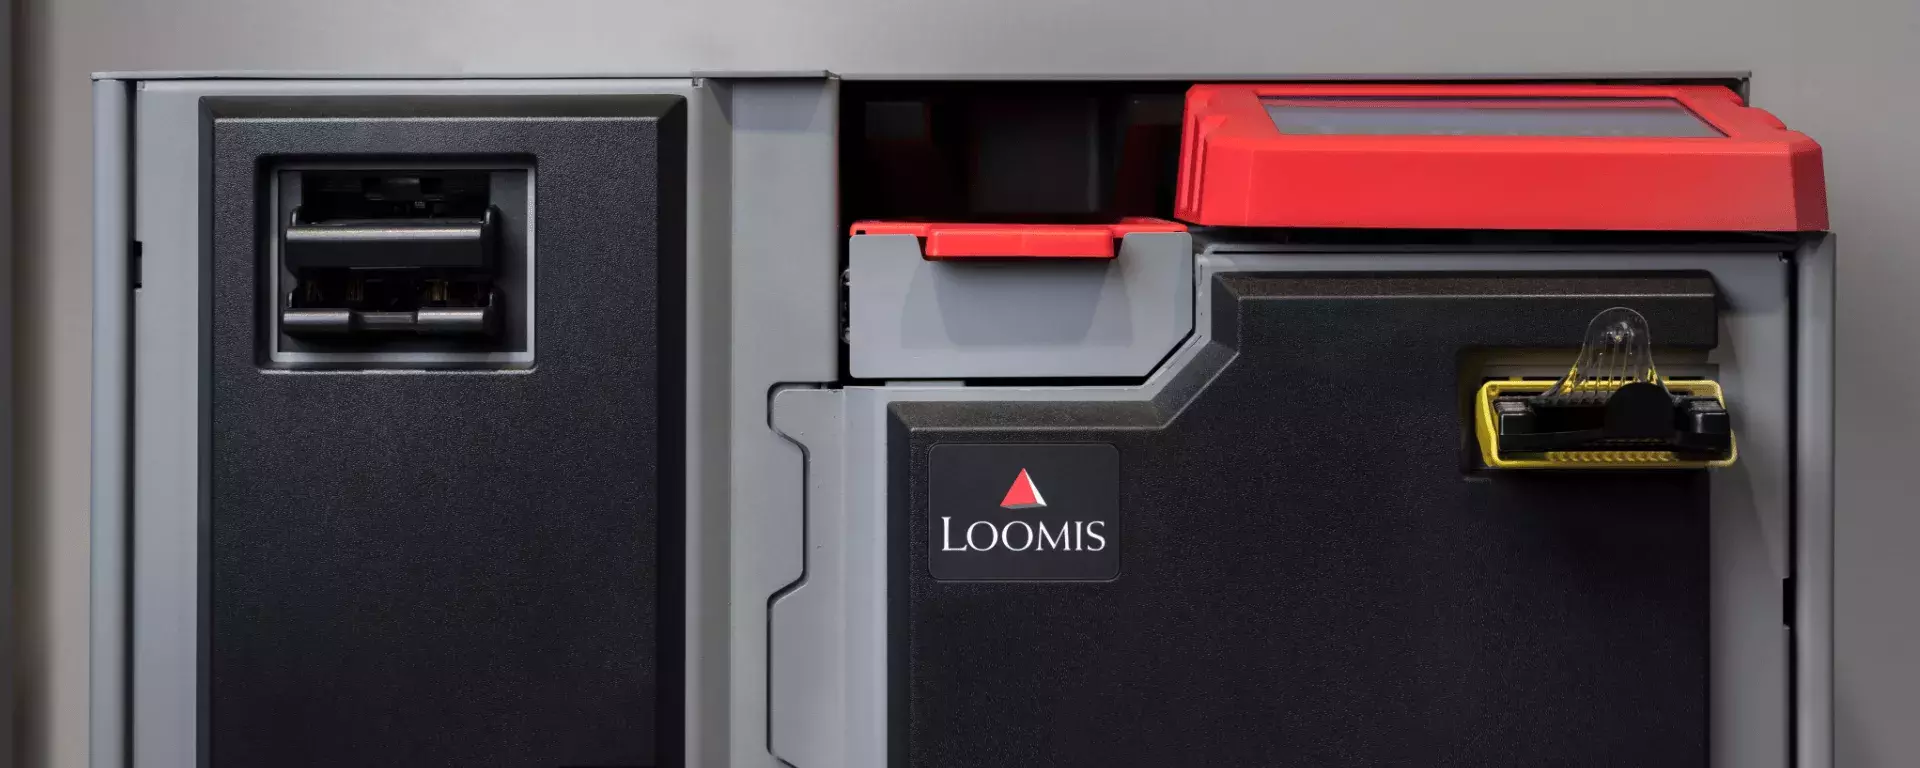 Loomis Locations smart safe solutions